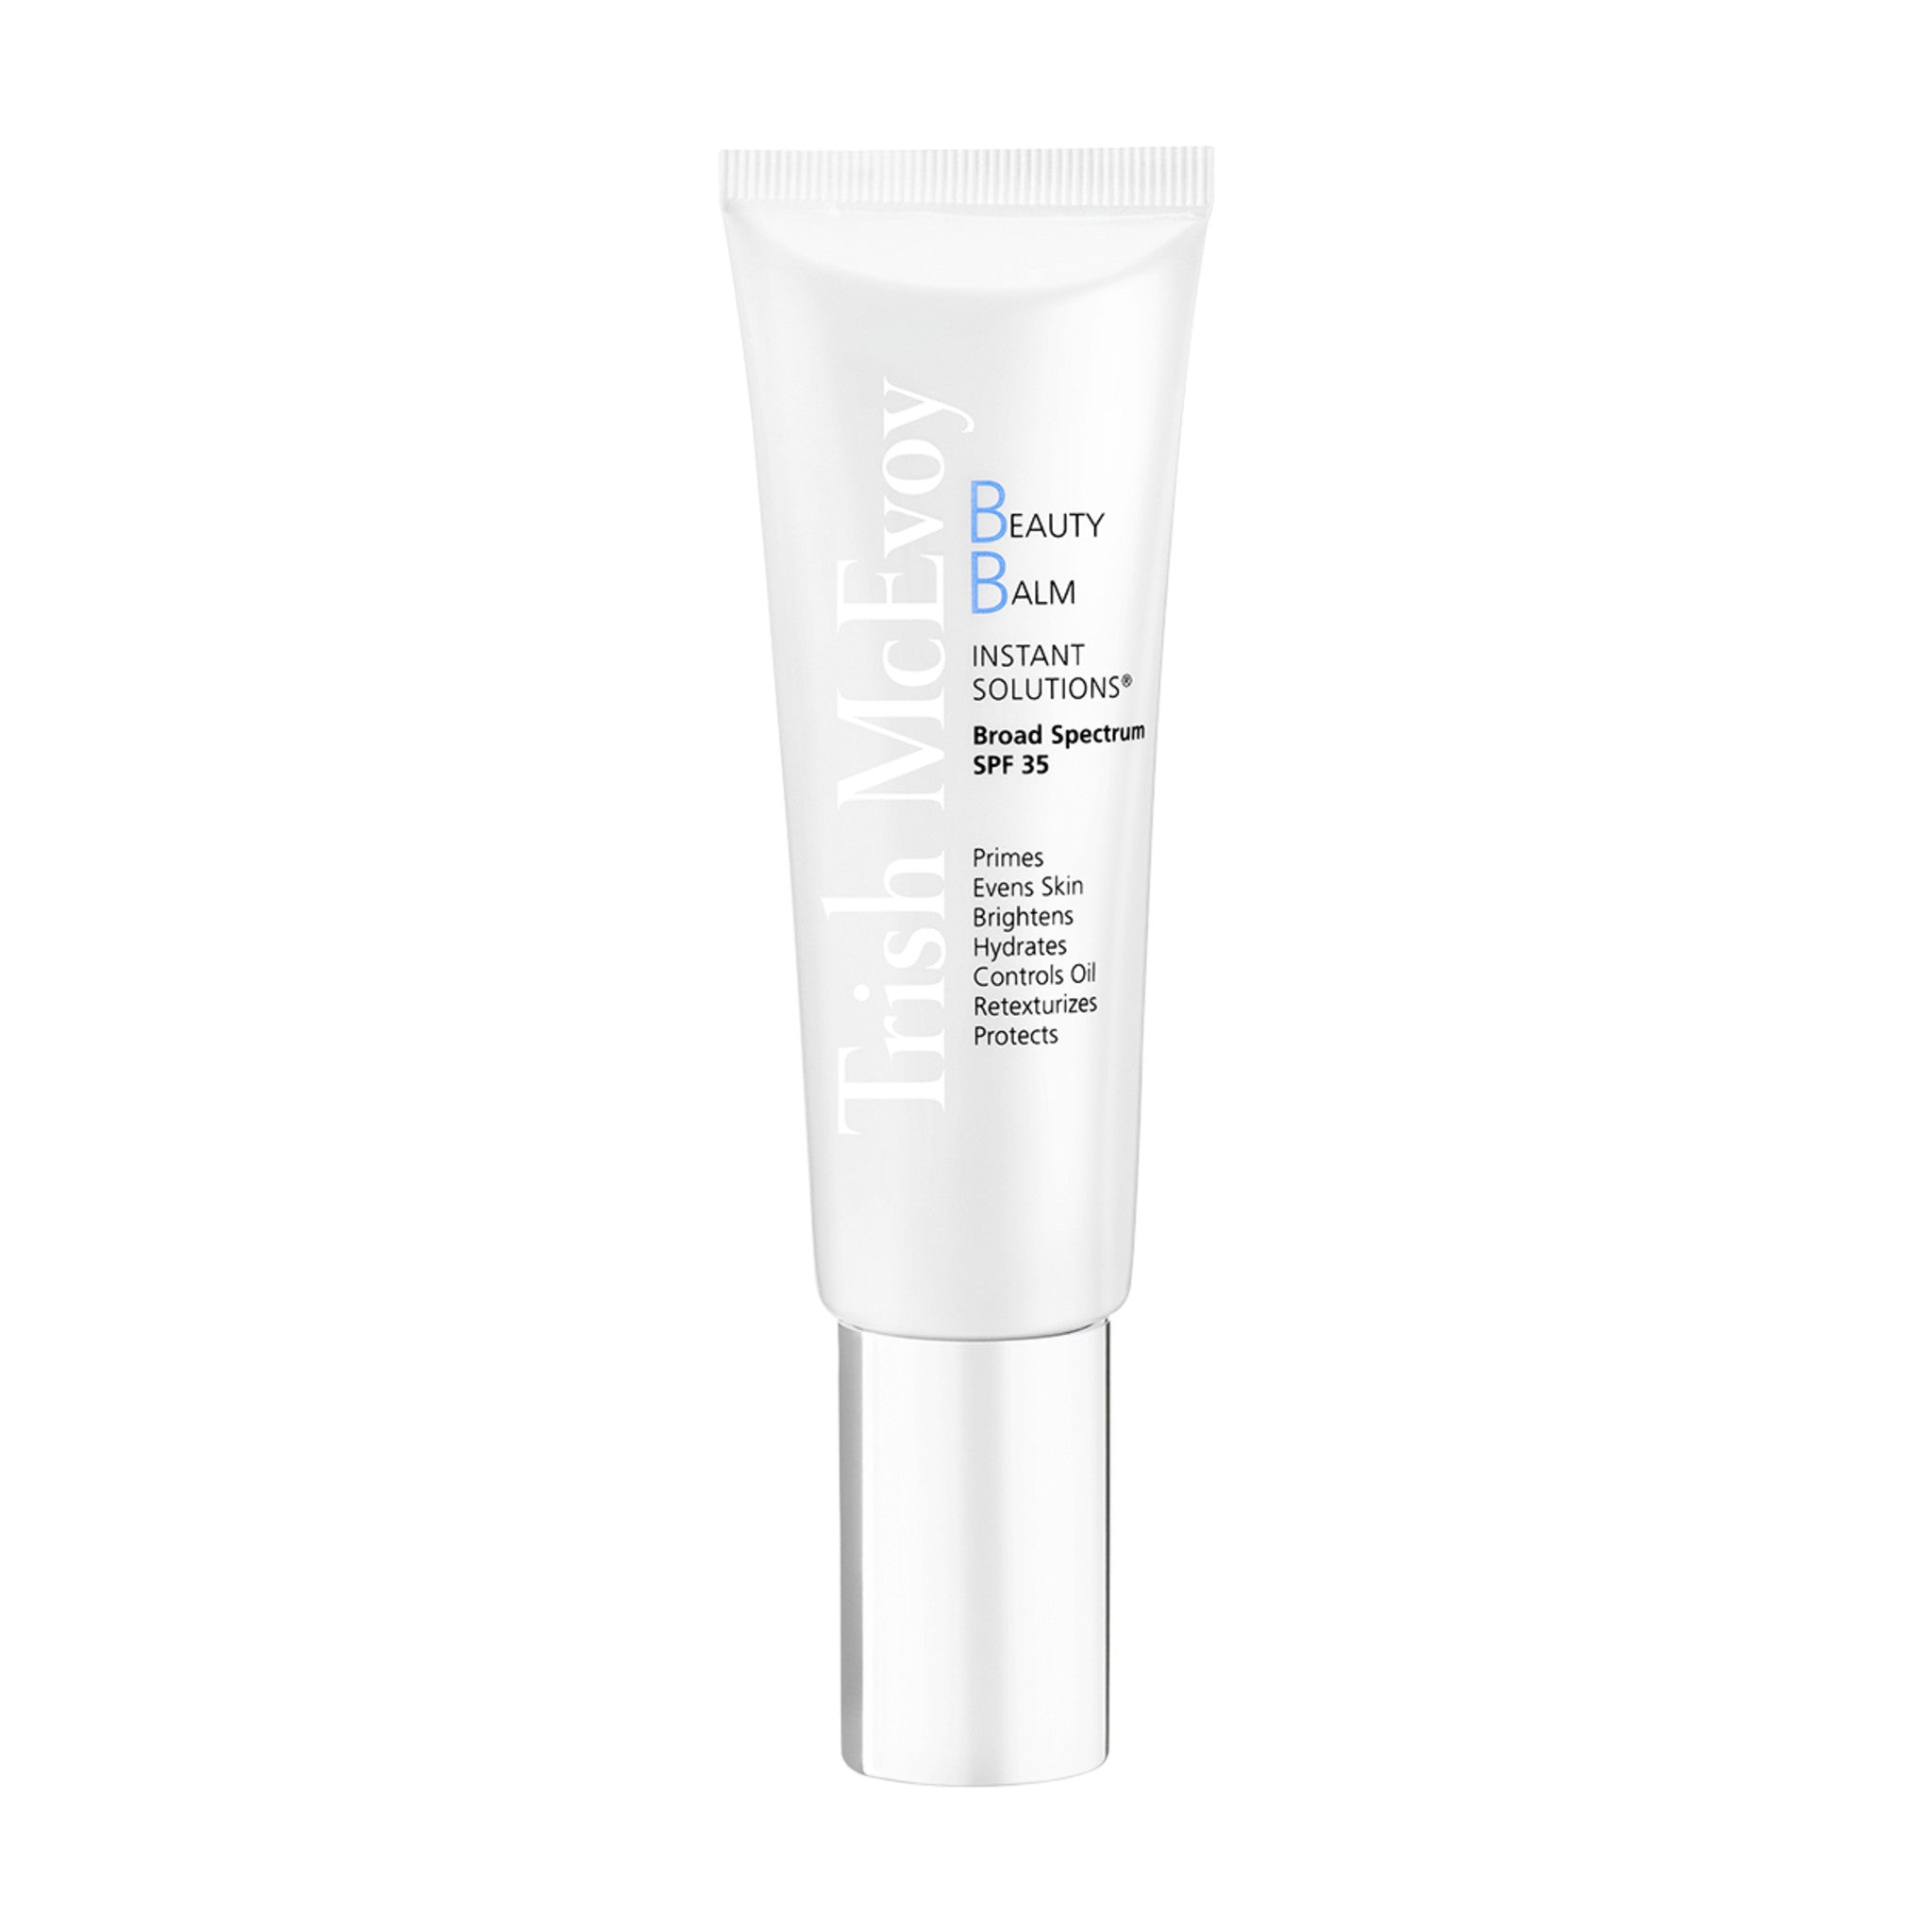 Trish McEvoy Beauty Balm Instant Solutions SPF 35 Color/Shade variant: Shade 0.5 main image. This product is for light complexions